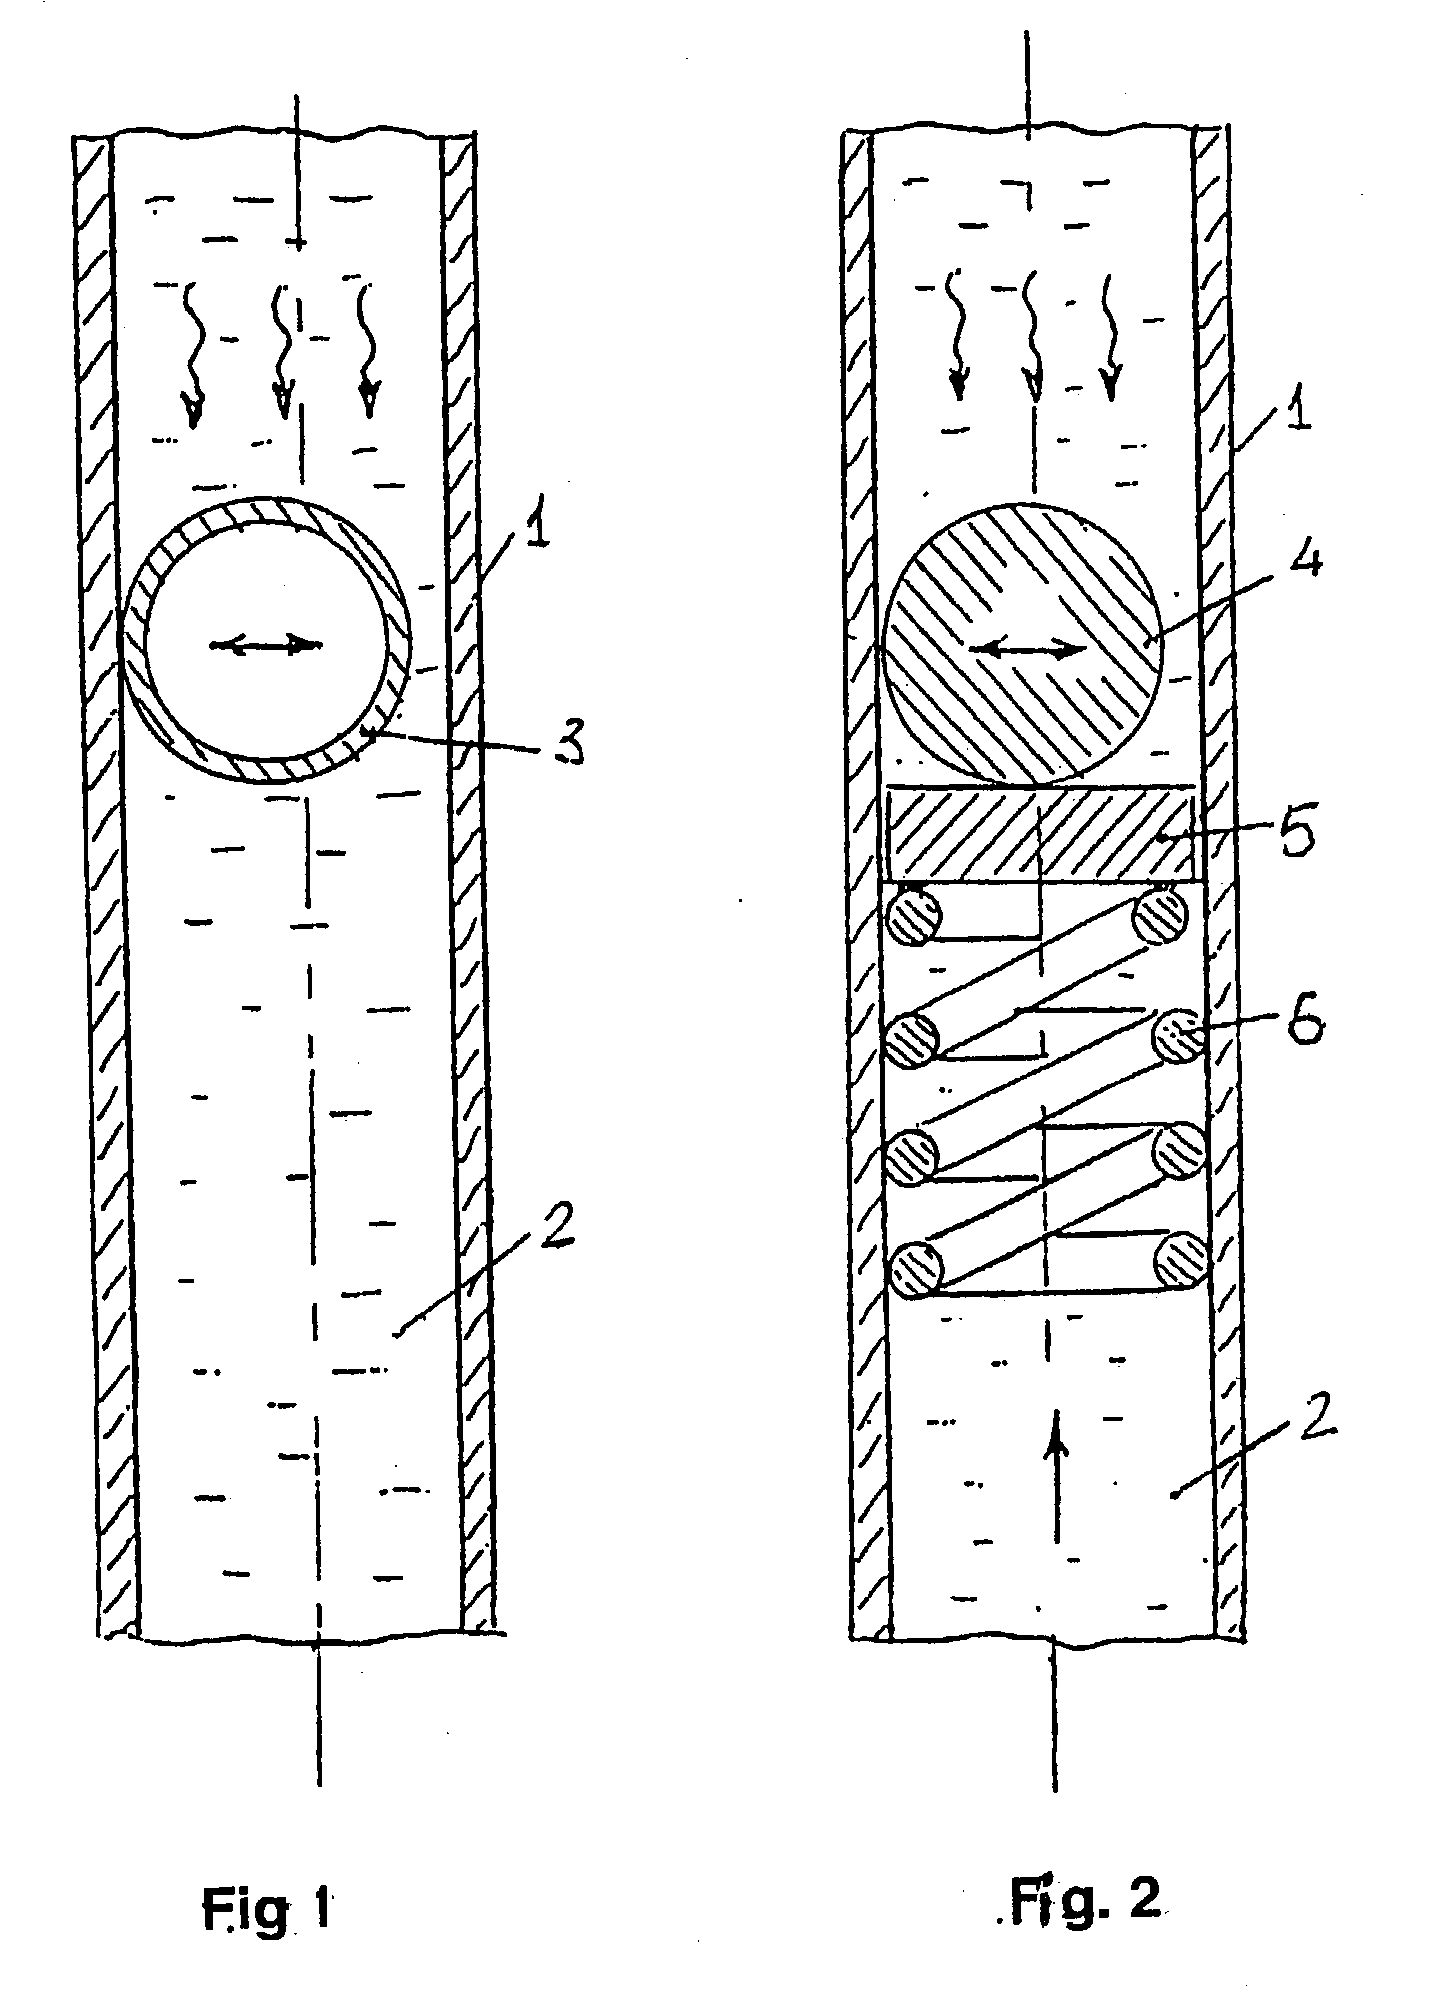 Method for vibrational impact on a pipe string in a borehole and devices for carrying out said method